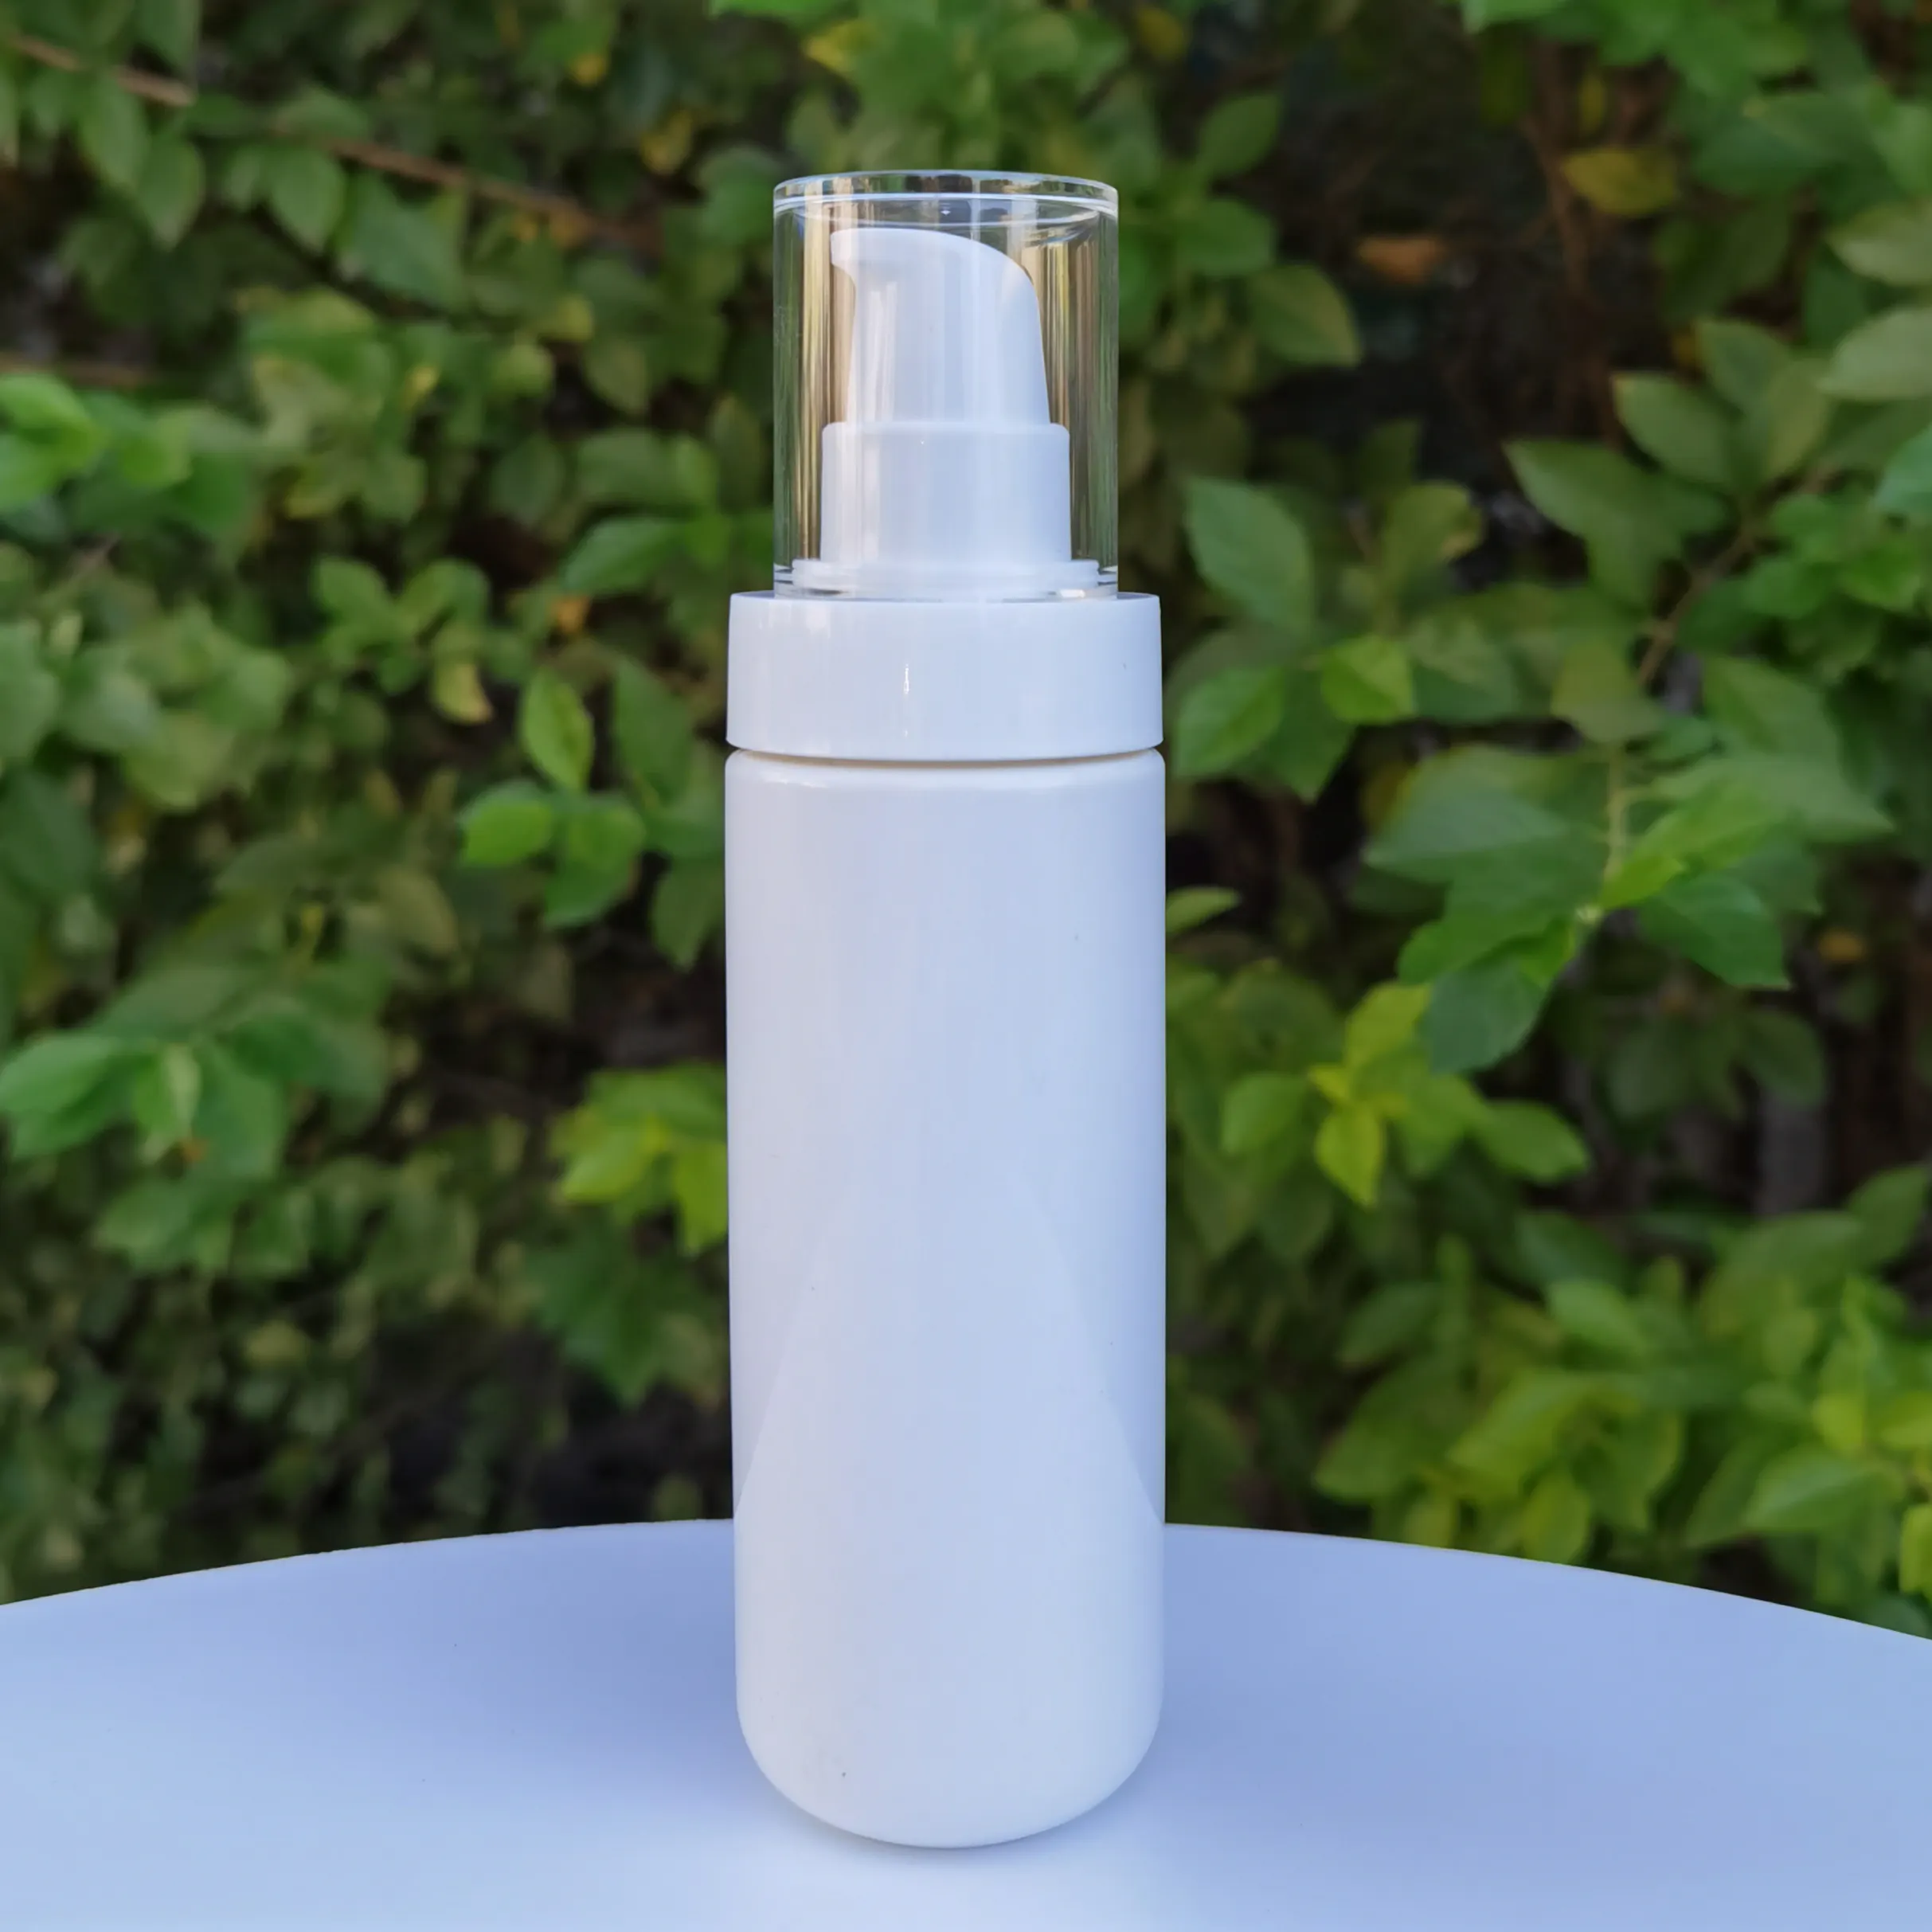 120ml 200ml high end cosmetic bottle setcosmetic bottle set skin care recycled luxury white round dropper bottle